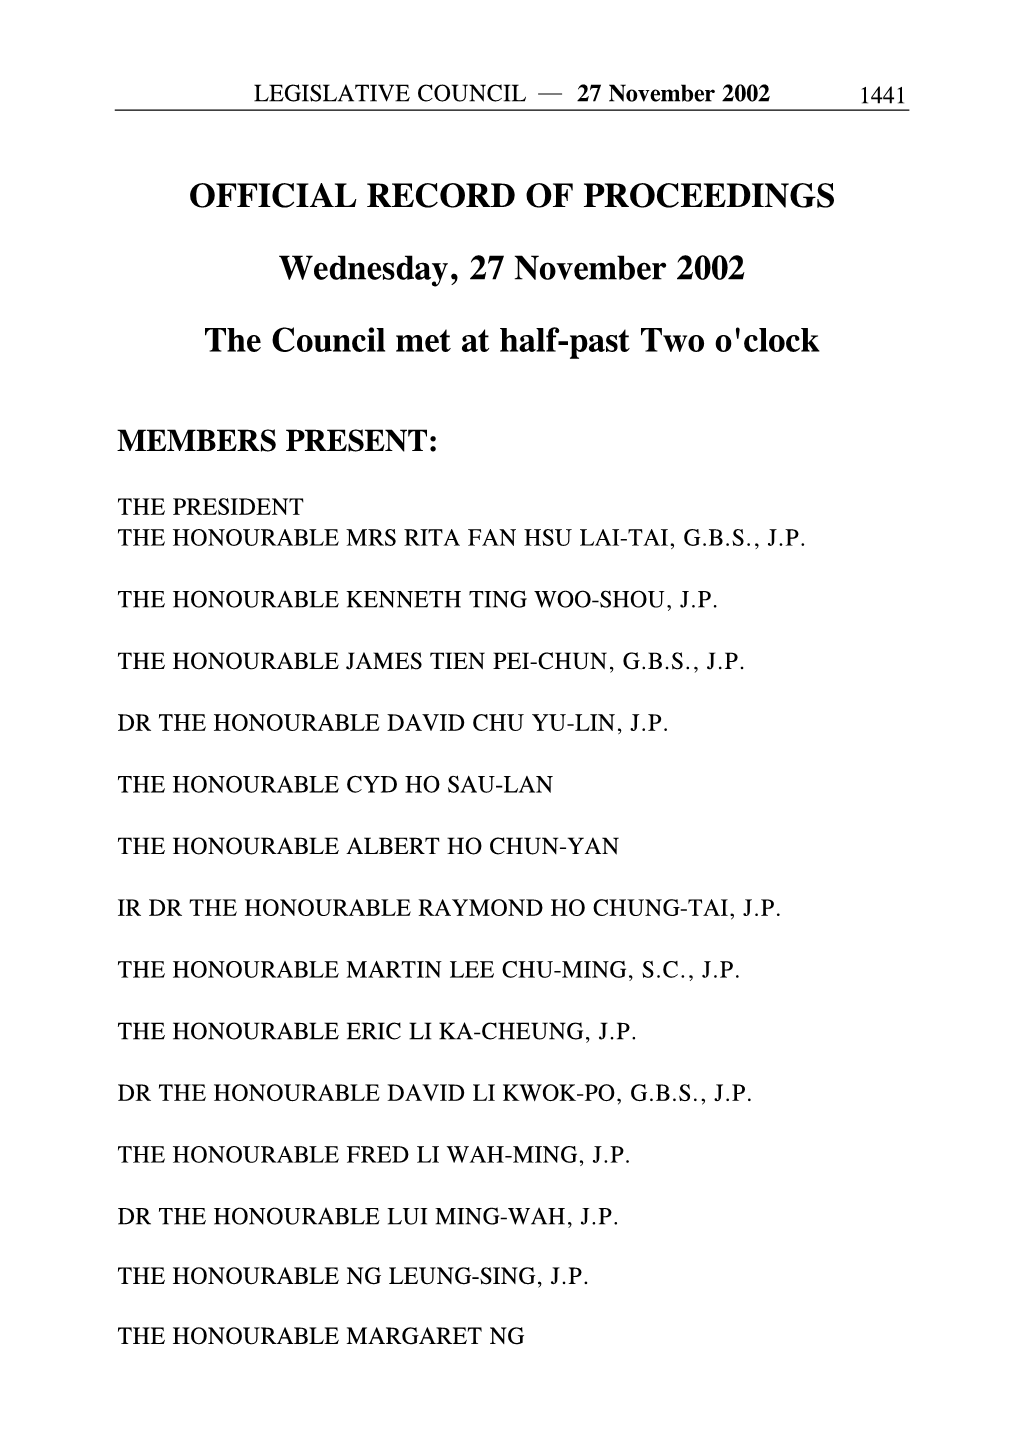 OFFICIAL RECORD of PROCEEDINGS Wednesday, 27 November 2002 the Council Met at Half-Past Two O'clock